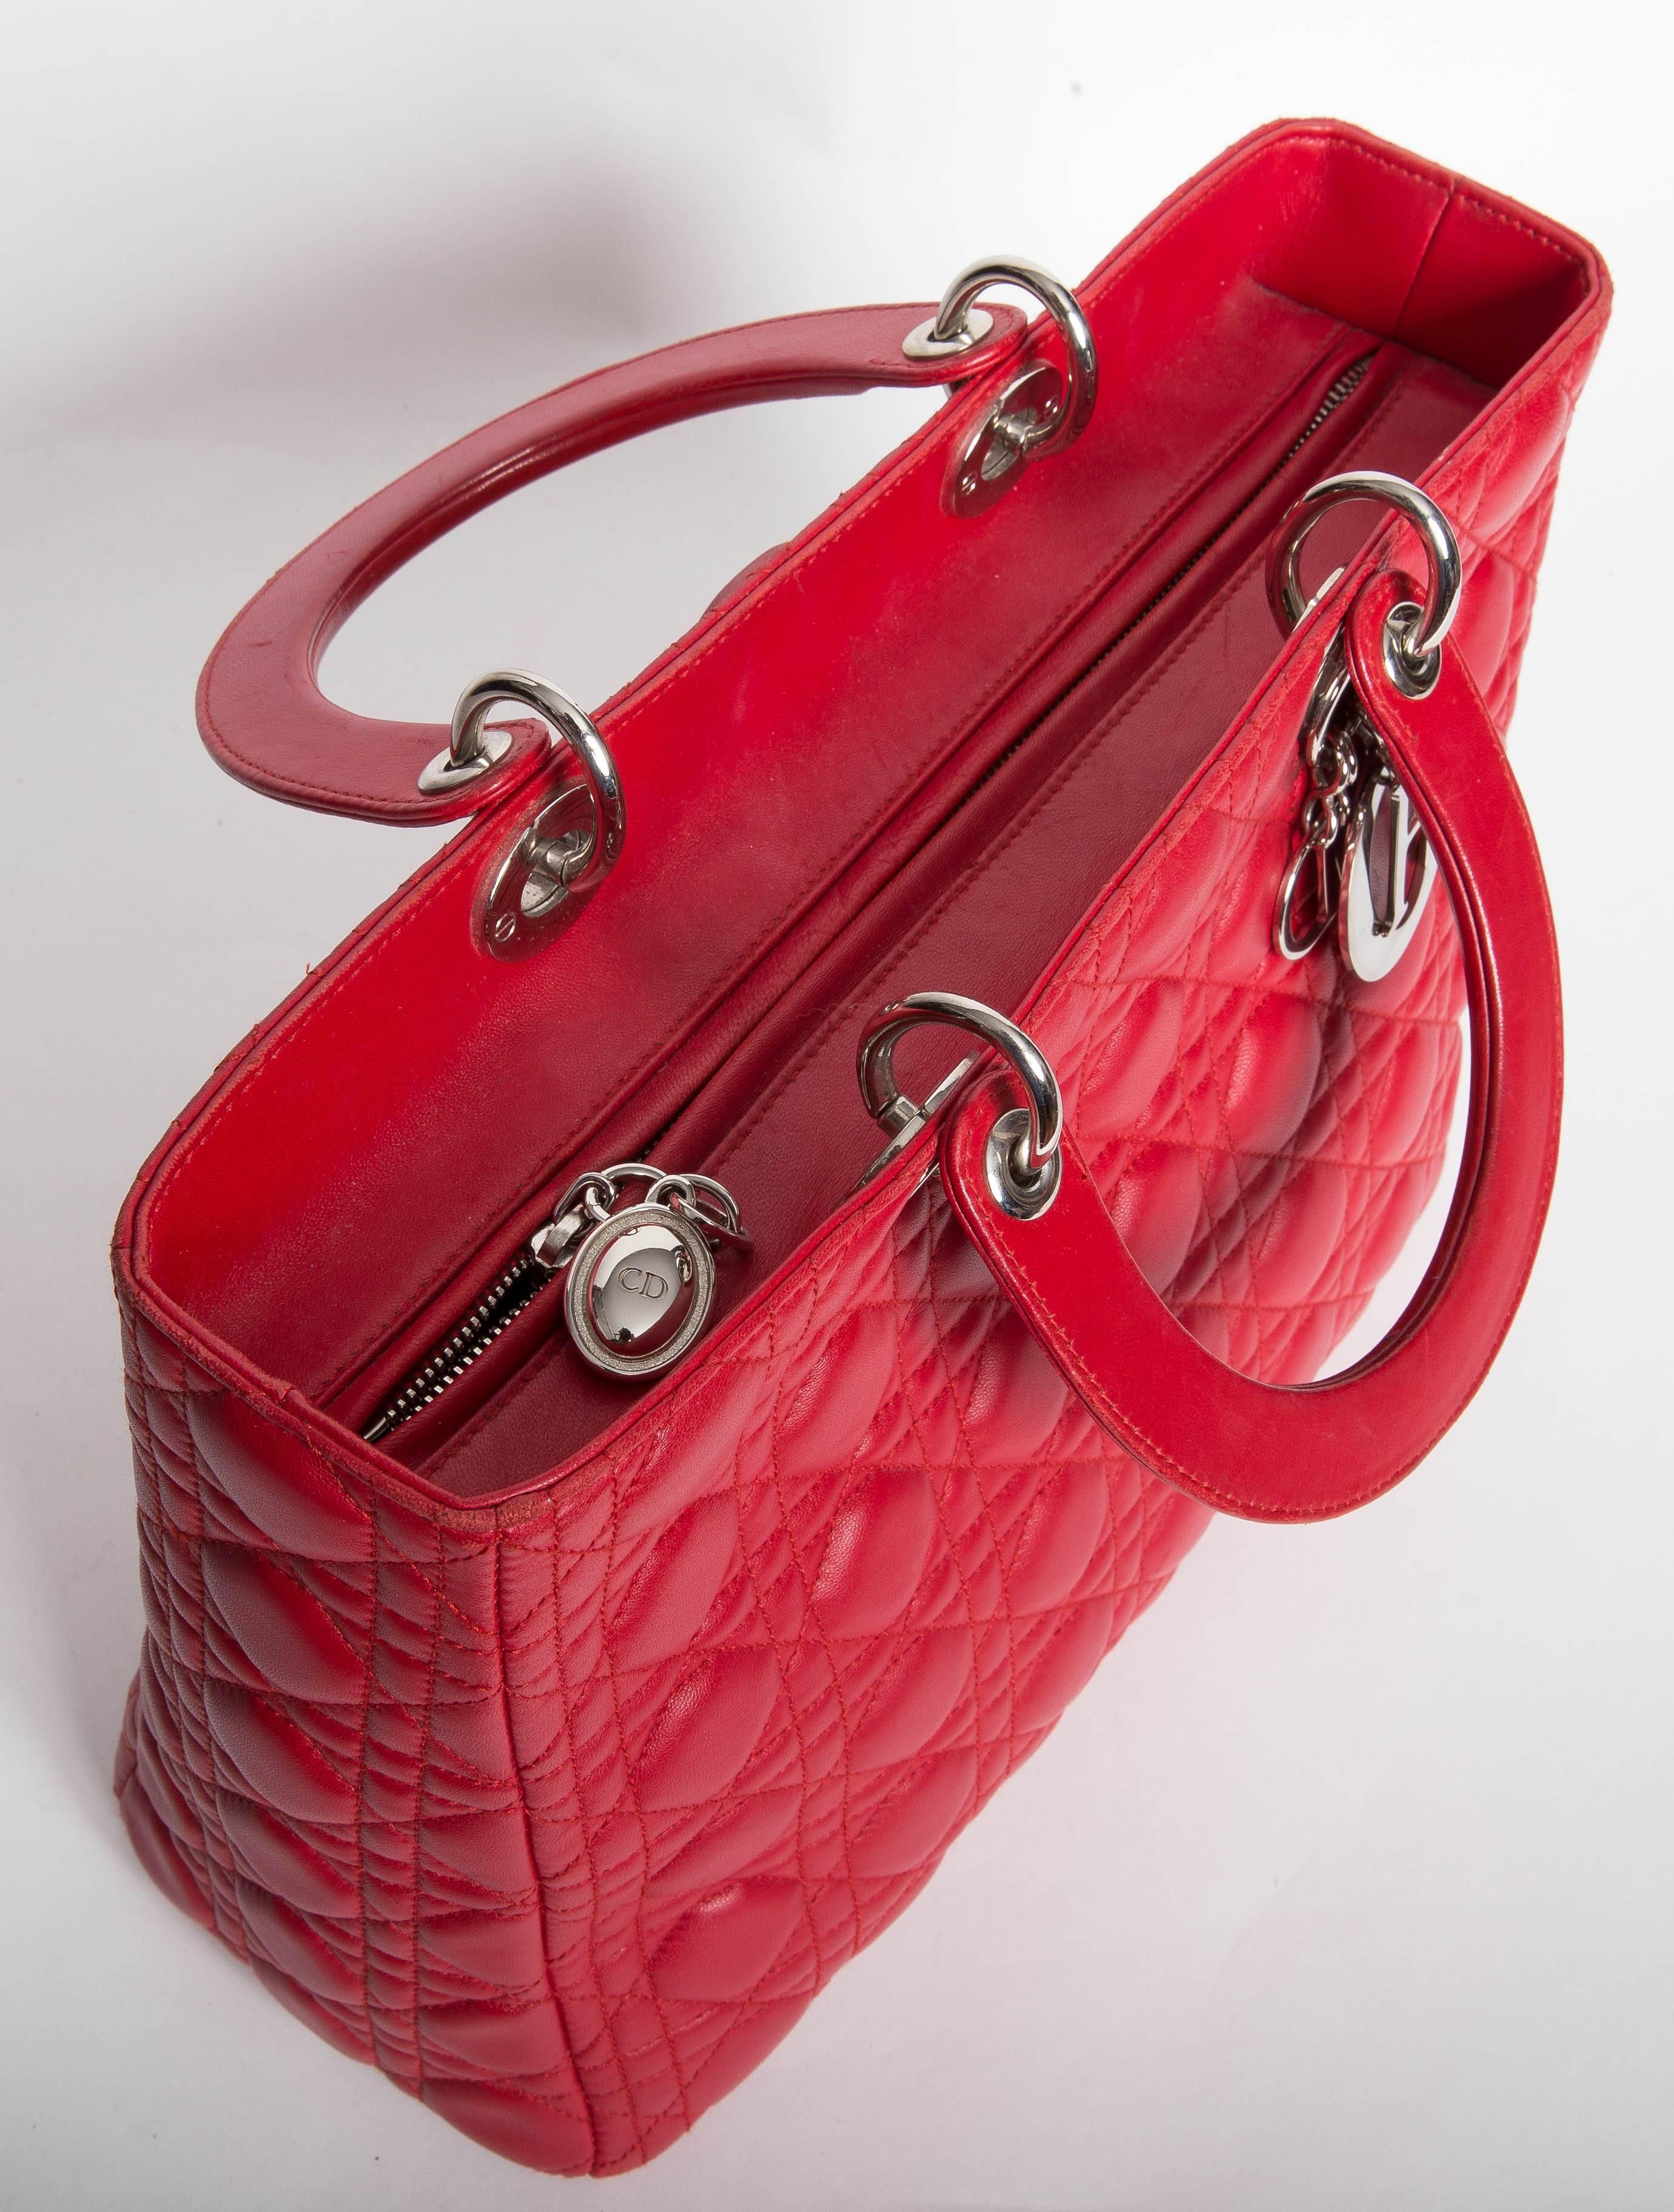 Christian Dior Lady Dior Red Leather Bag with Silver Hardware 3